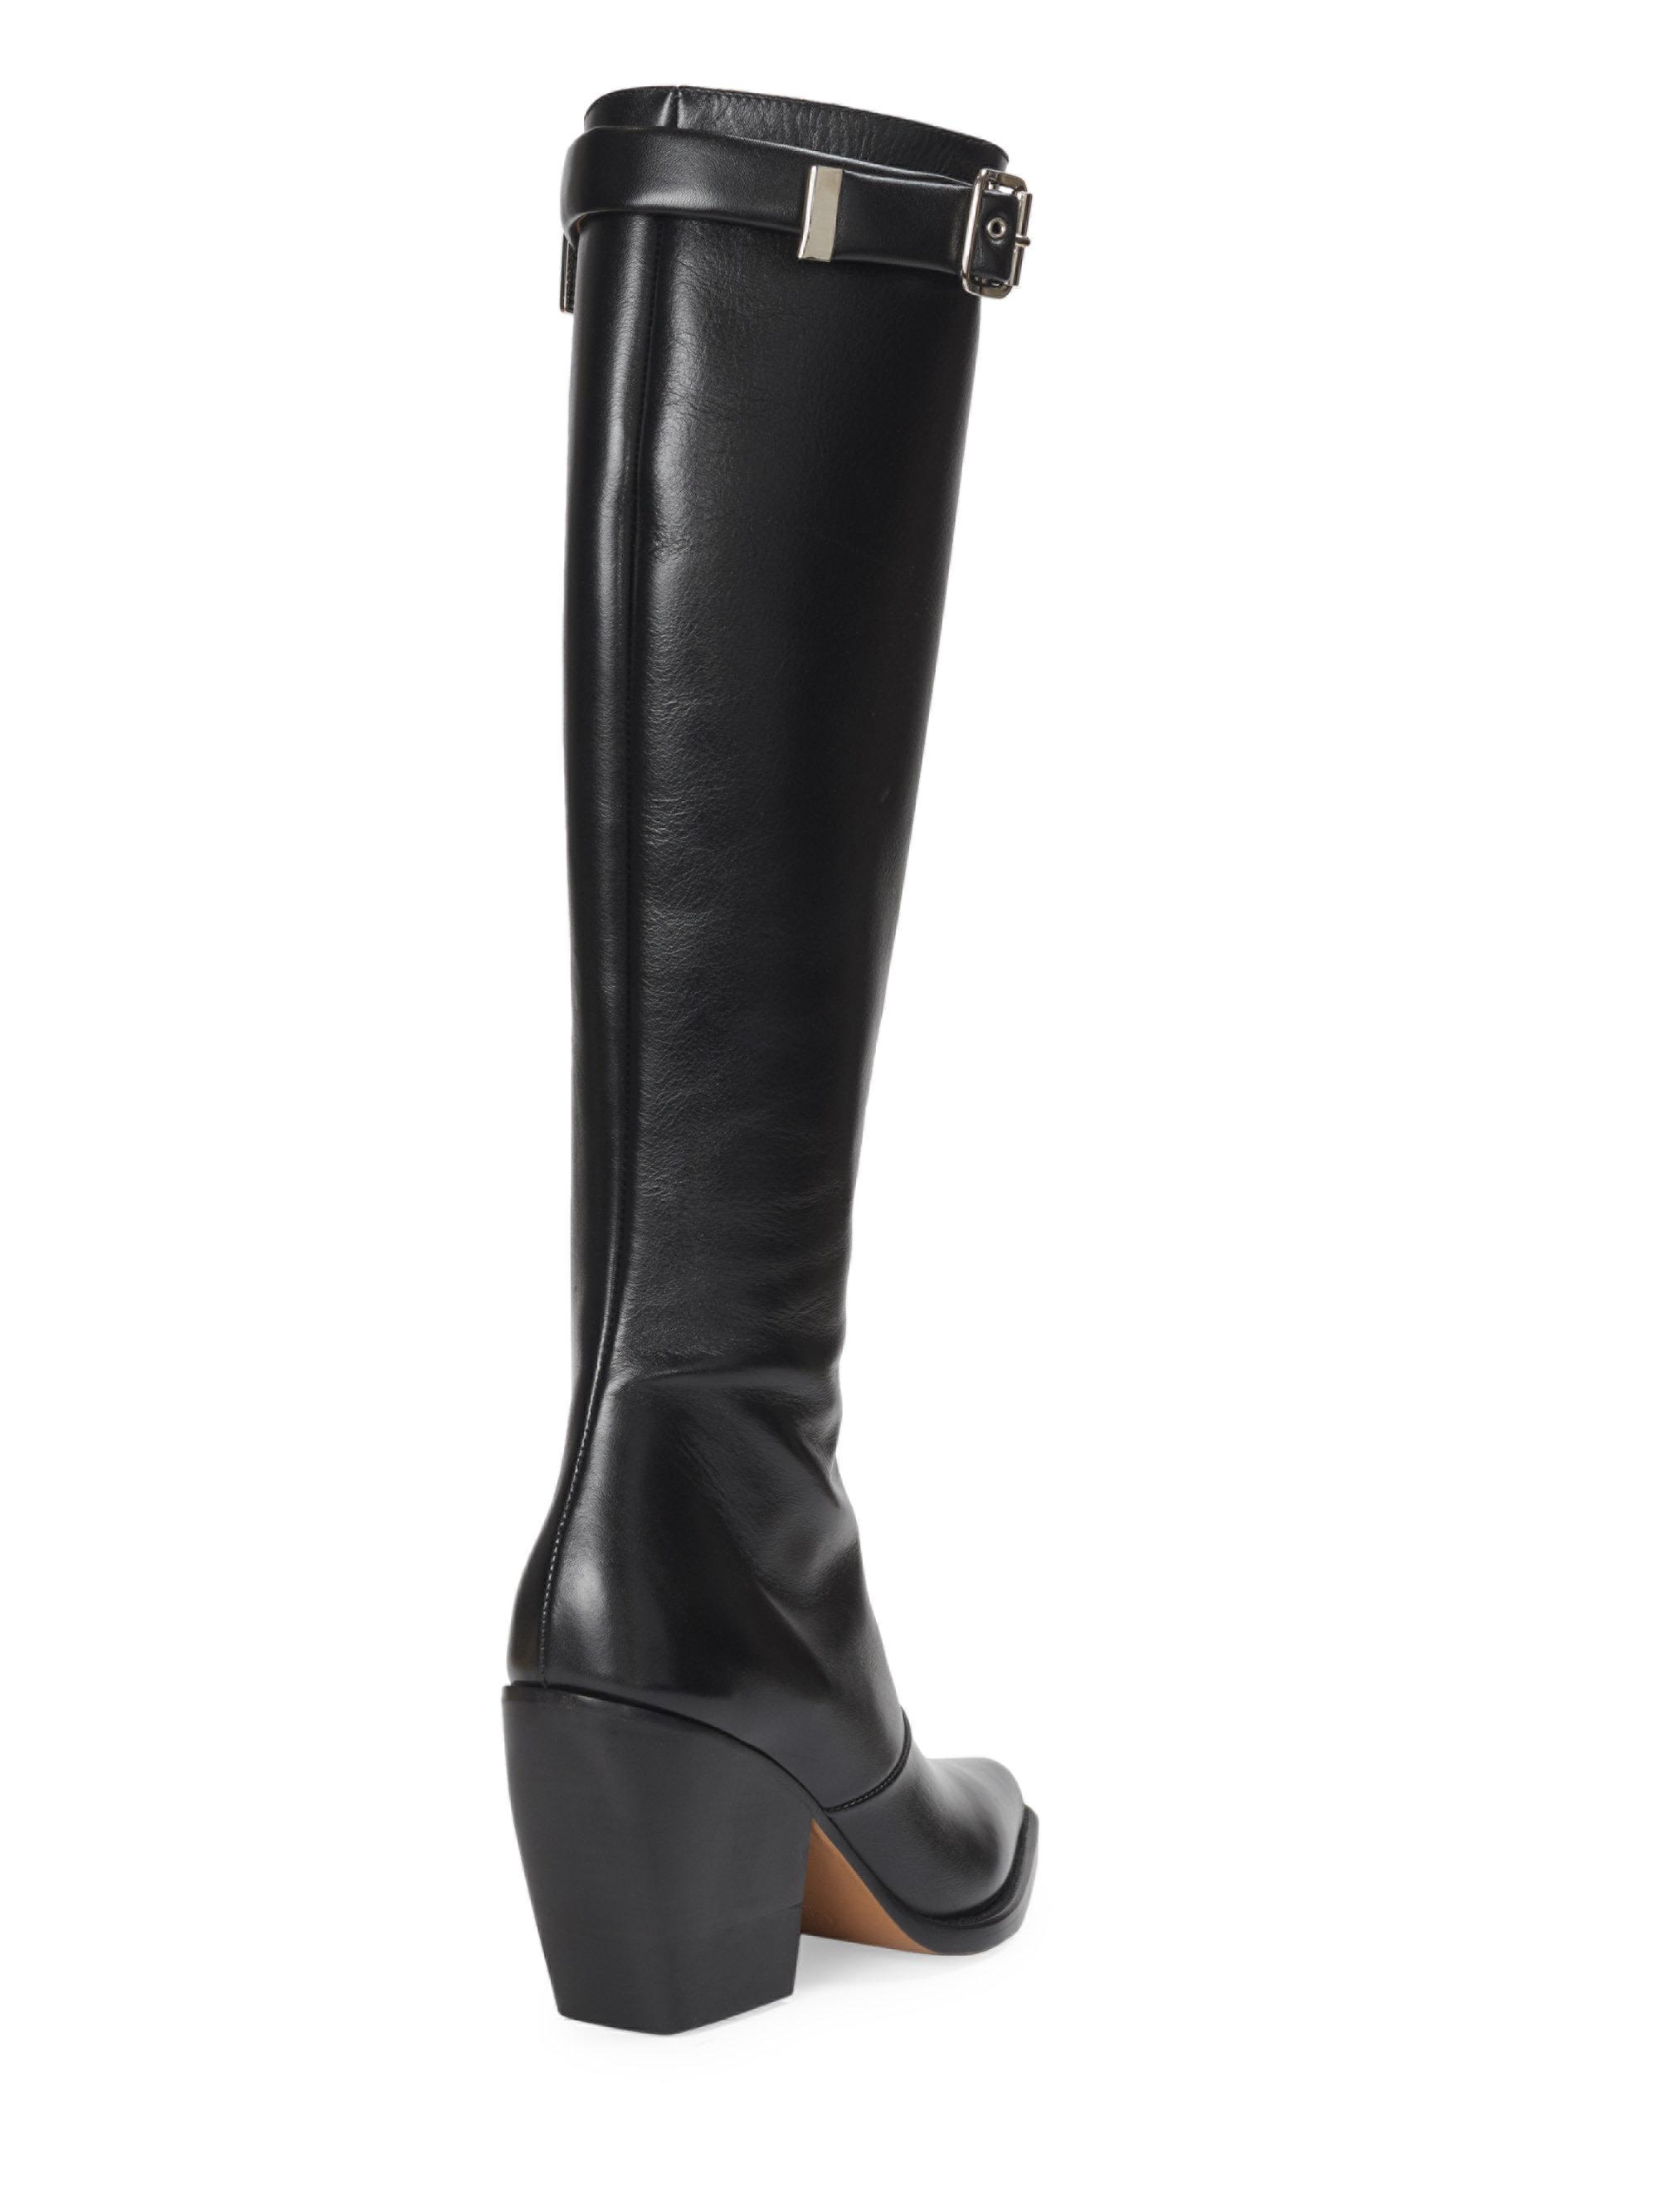 Chloé Rylee Buckle Leather Knee-high Boots in Black - Lyst